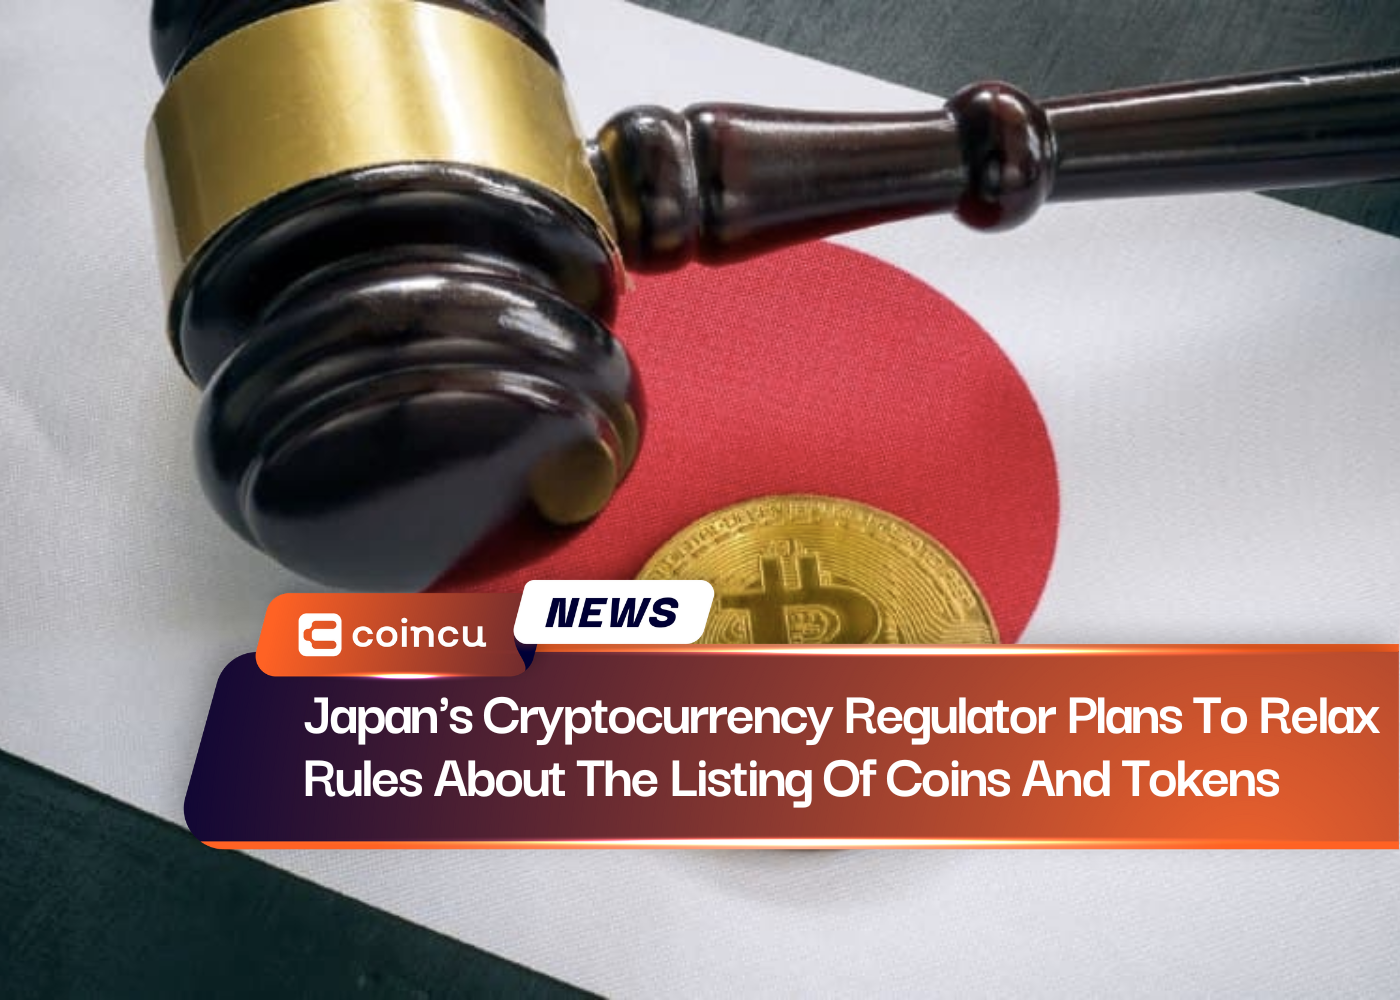 Japan's Cryptocurrency Regulator Plans To Relax Rules About The Listing Of Coins And Tokens